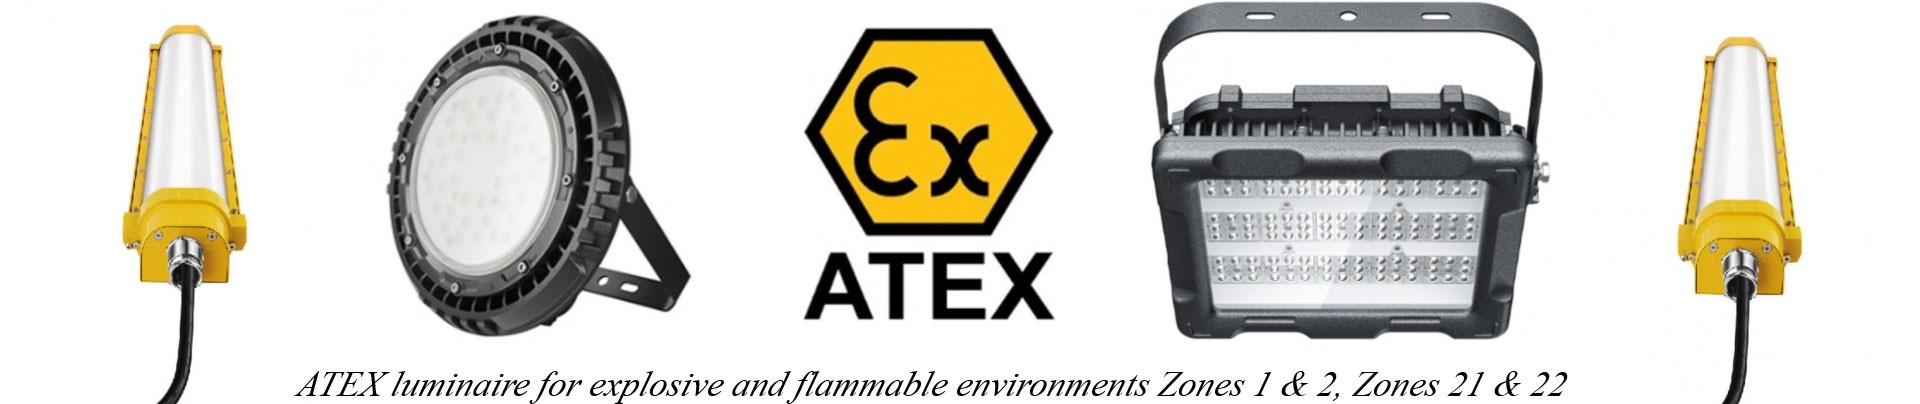 ATEX luminaire for explosive and flammable environments Zones 1 & 2, Zones 21 & 22